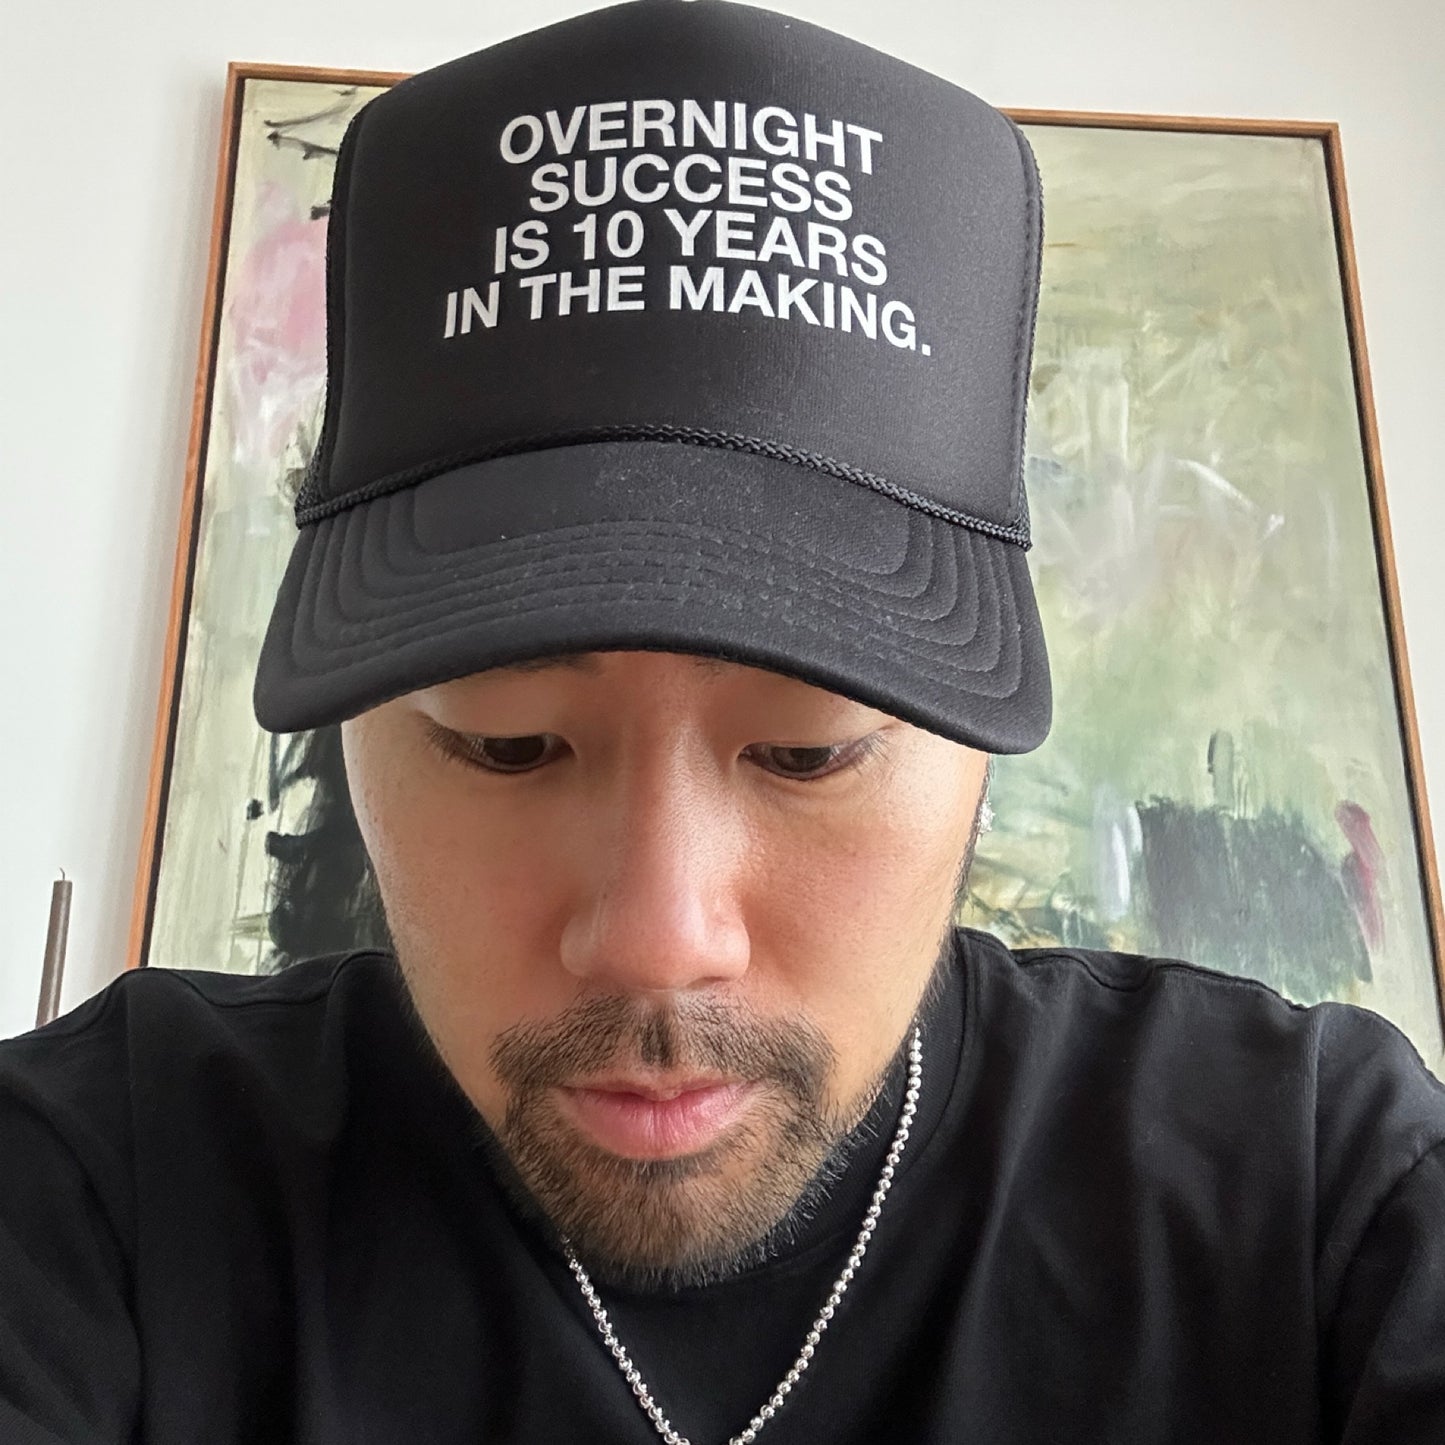 10 Years In The Making Trucker Hat